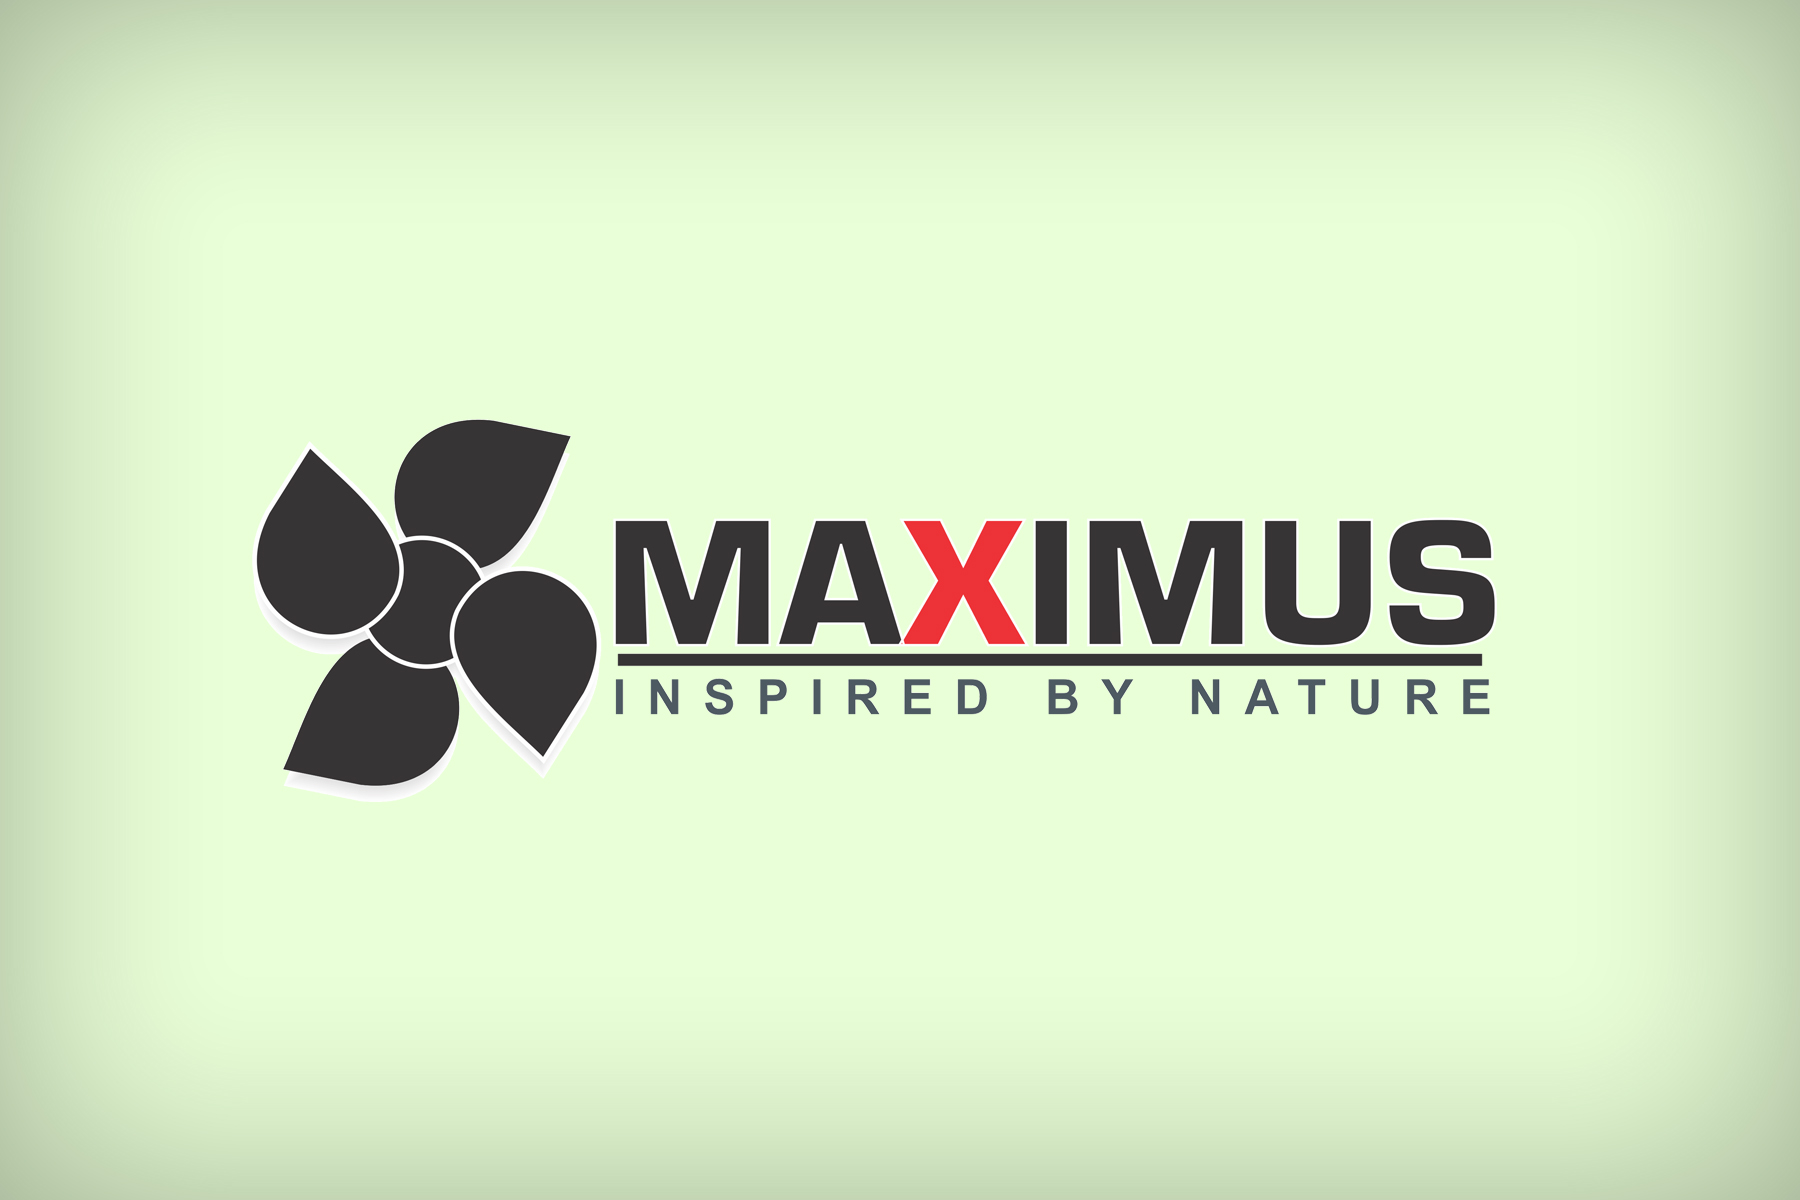 MAXIMUS - Inspired by nature logo!